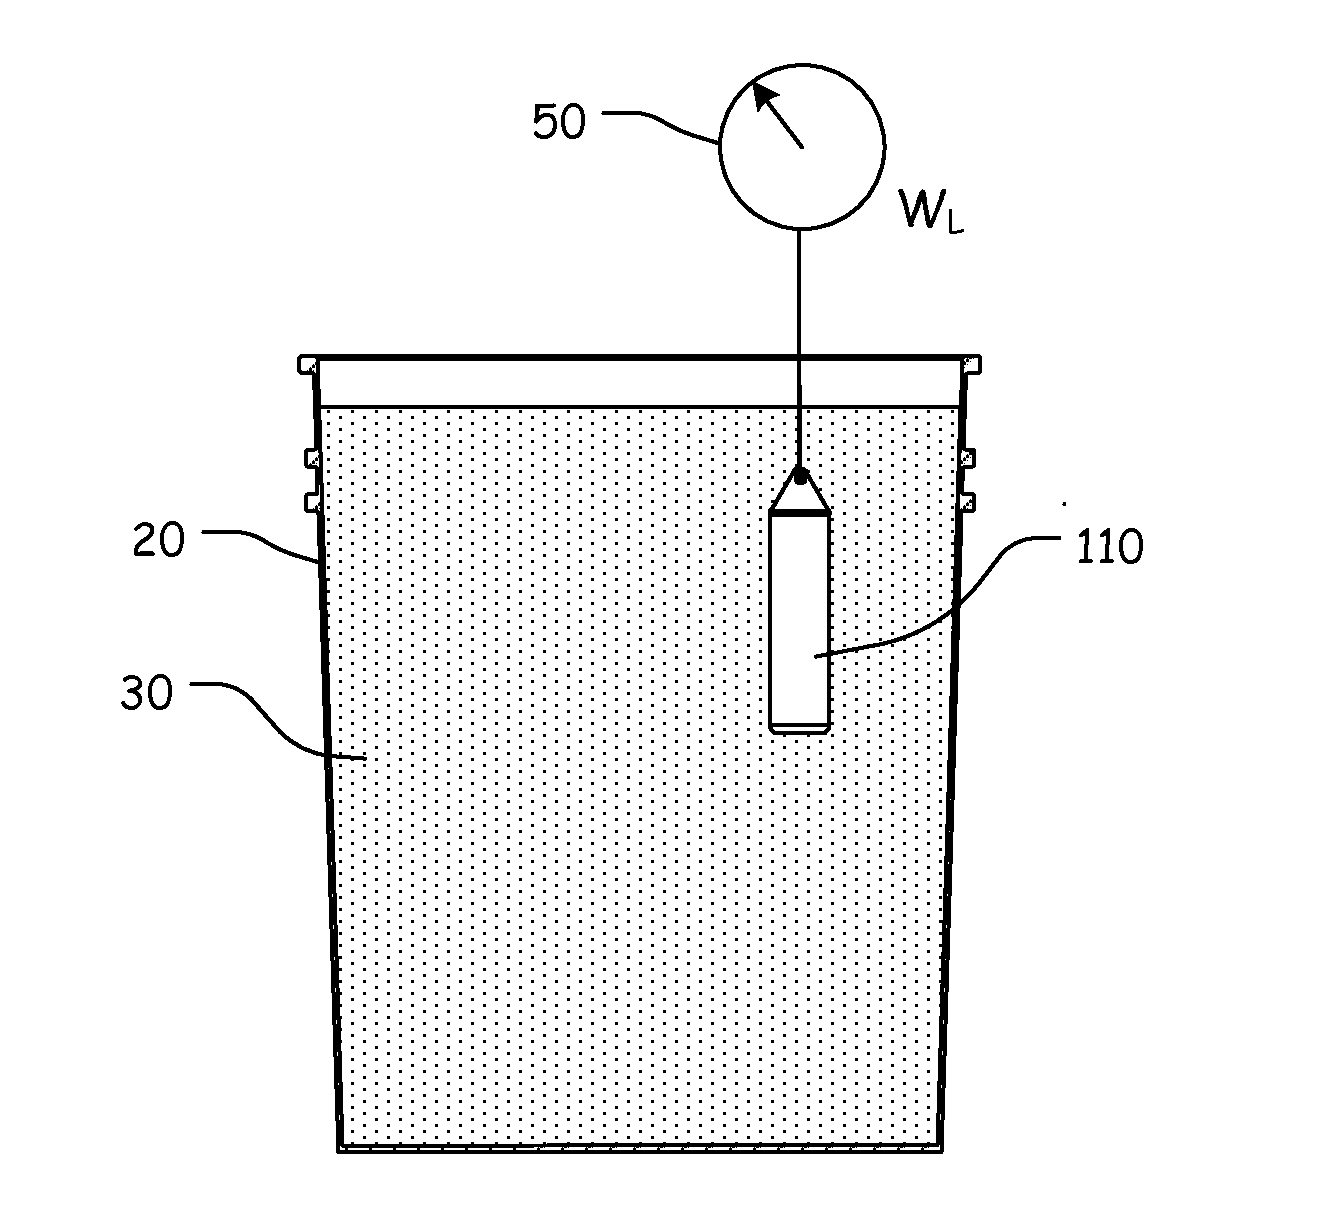 Systems, Methods, and Apparatuses for Monitoring and/or Controlling the Density of a Fluid